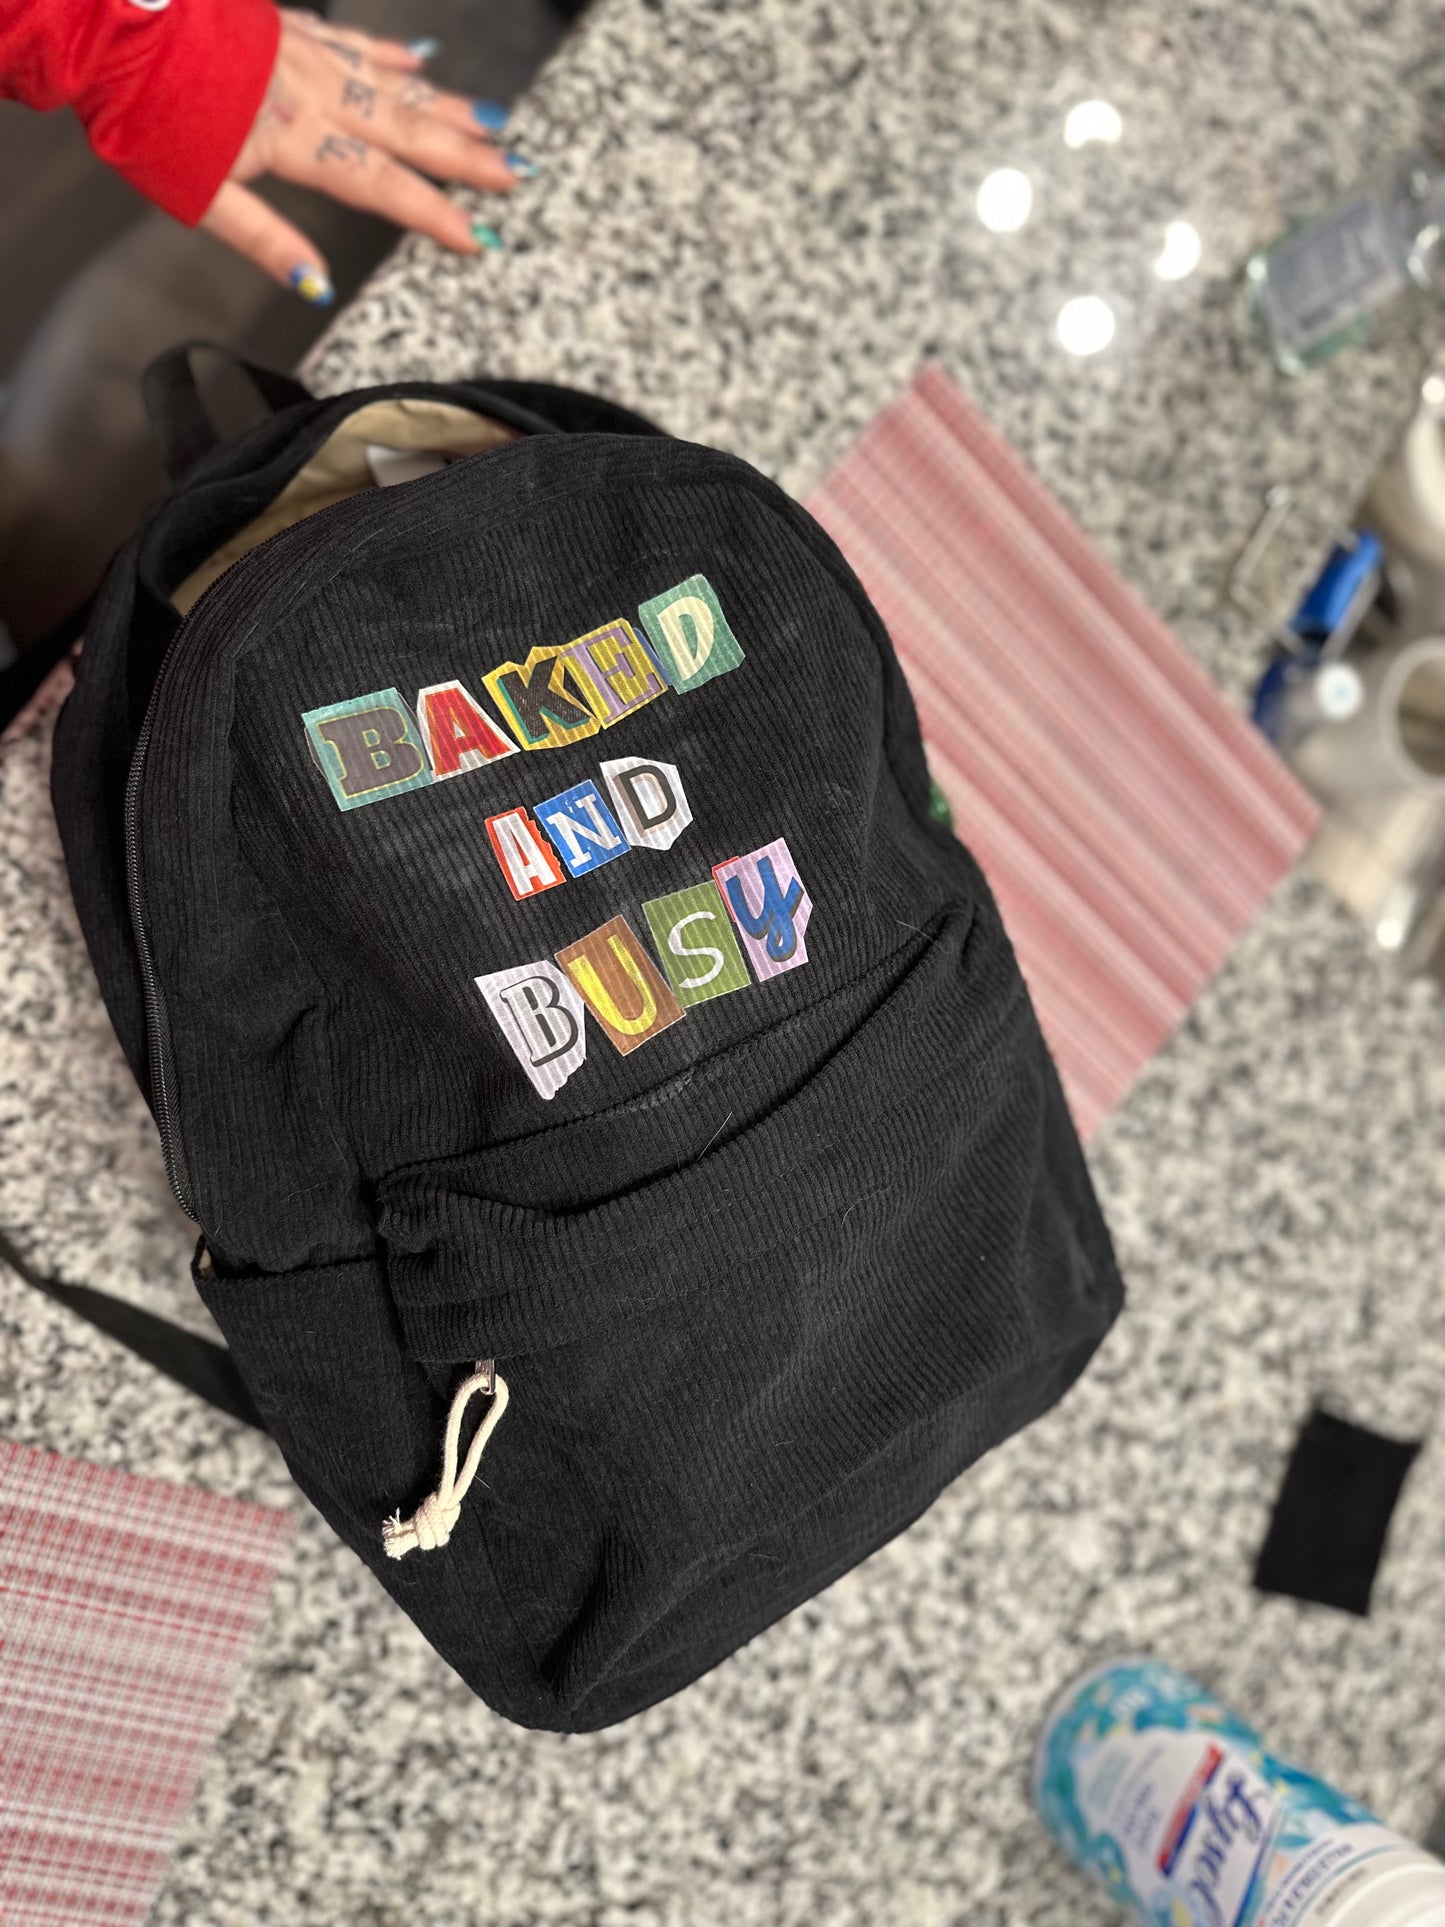 Baked&Busy Corduroy Back Pack￼